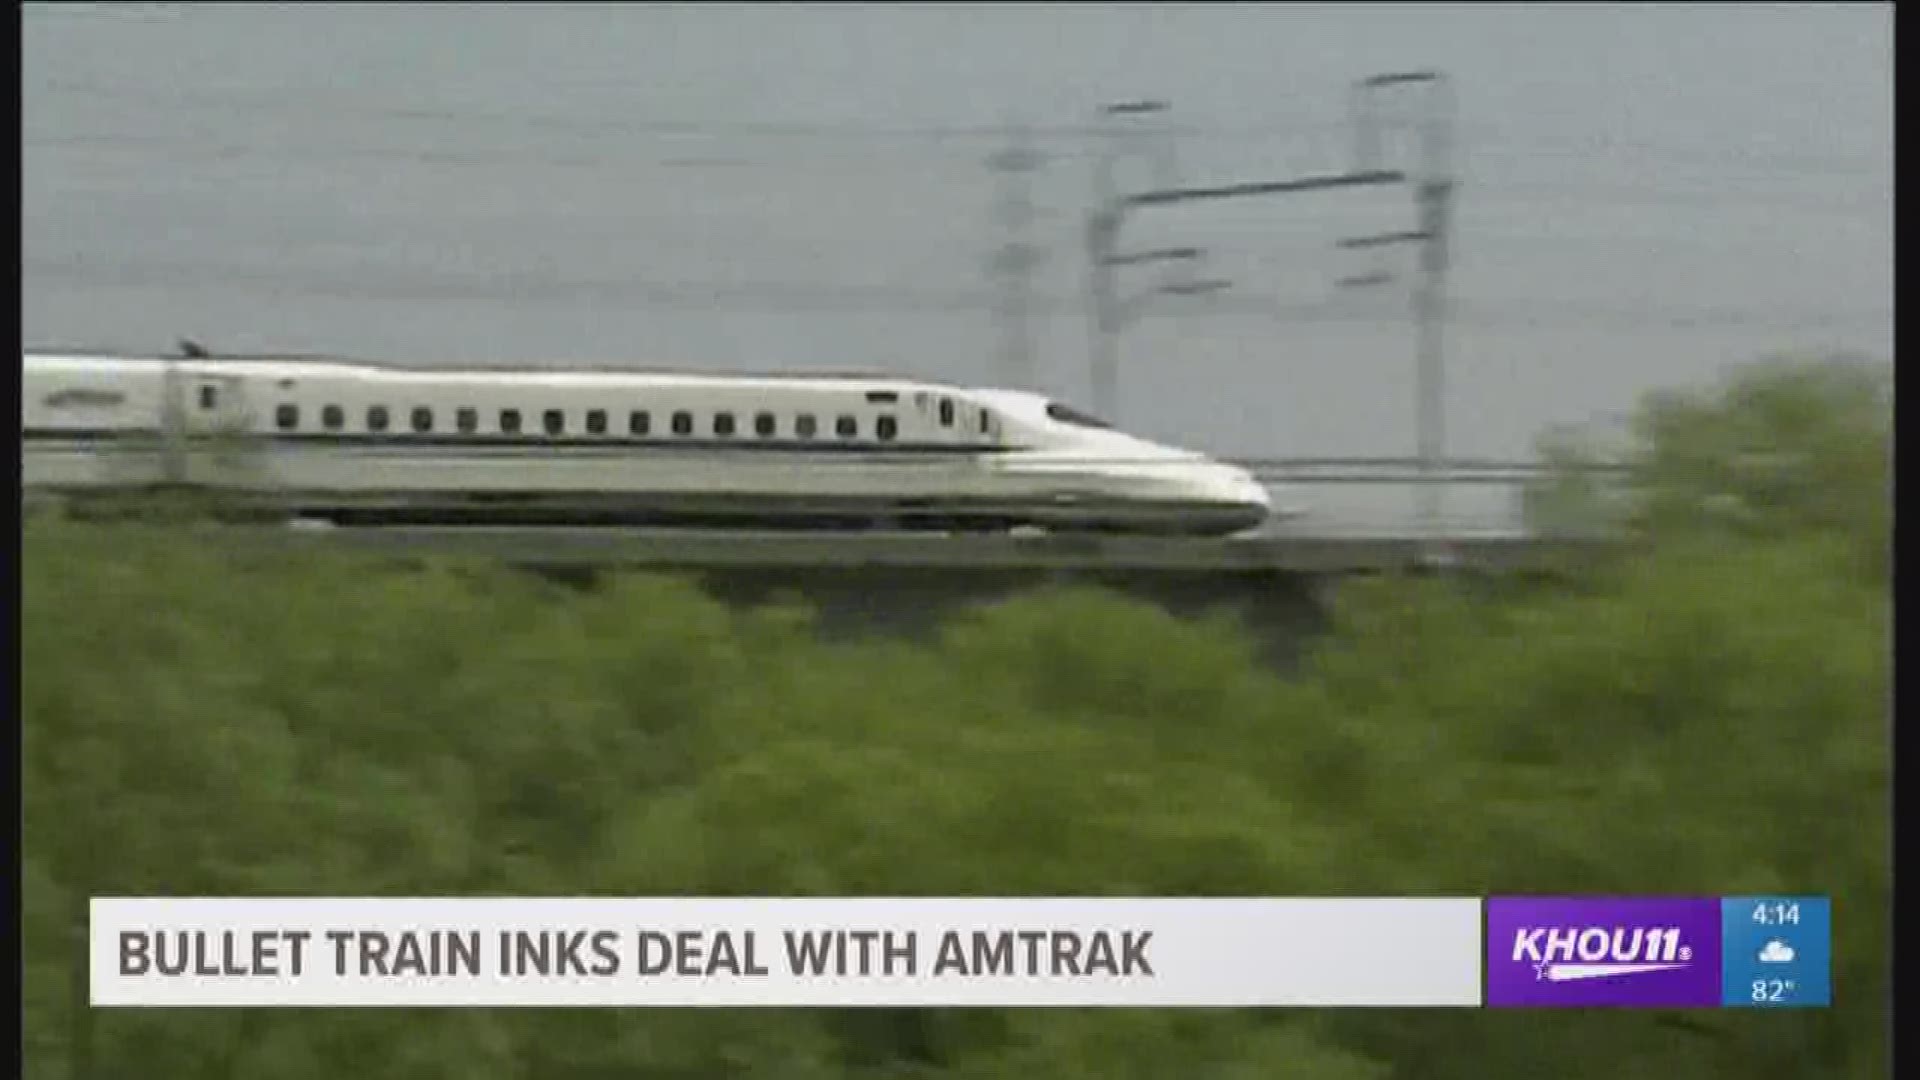 Developers for the proposed bullet train that will travel from Houston to Dallas reached an agreement with Amtrack.